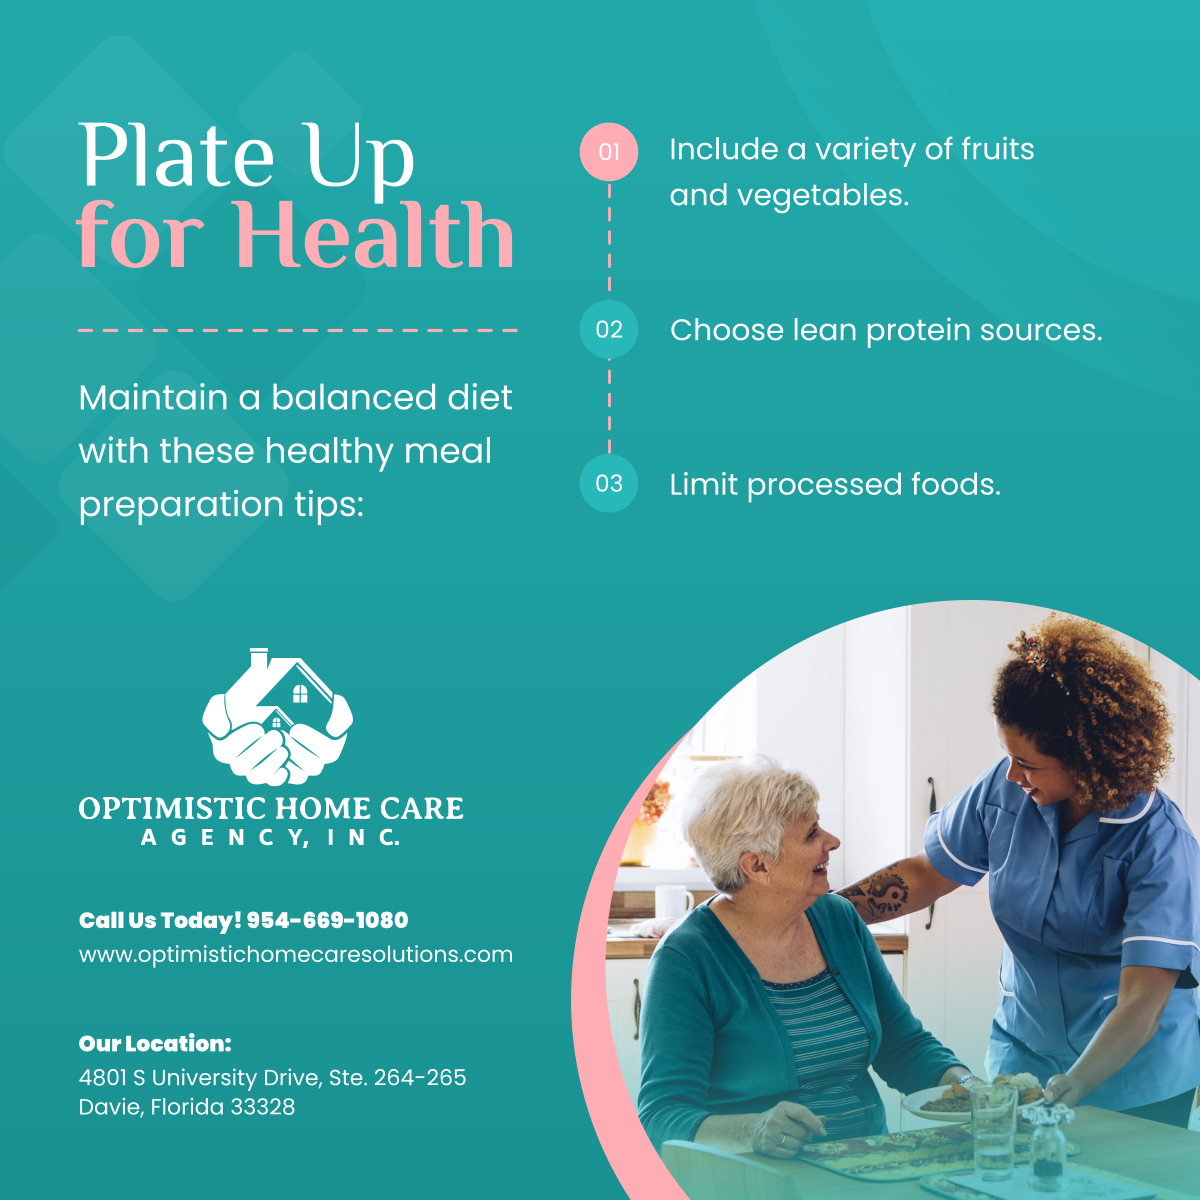 Stay healthy with these meal preparation tips. Contact us for assistance with meal planning and preparation! 

#DavieFL #HomeCareAgency #HealthyEating #NutritionTips #BalancedDiet